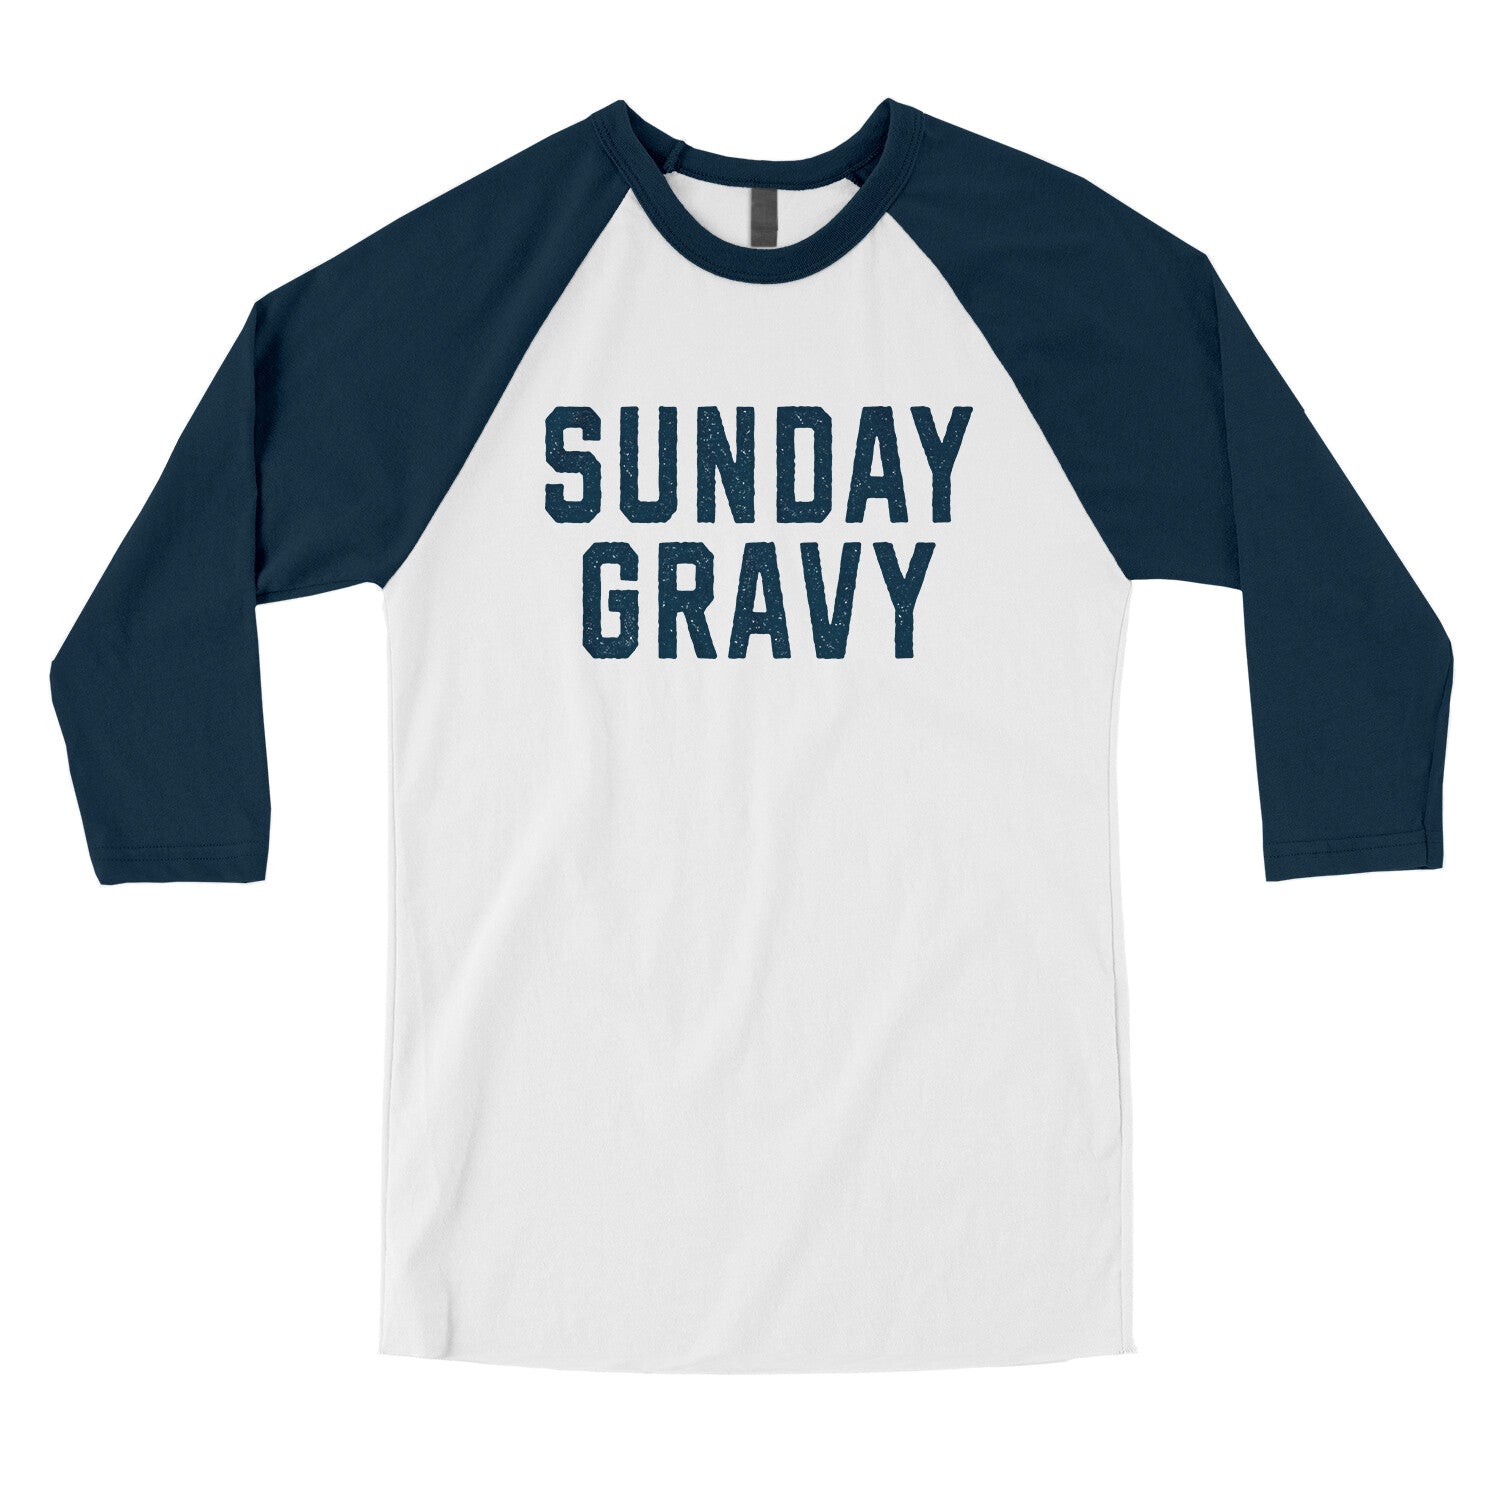 Sunday Gravy in White with Navy Color